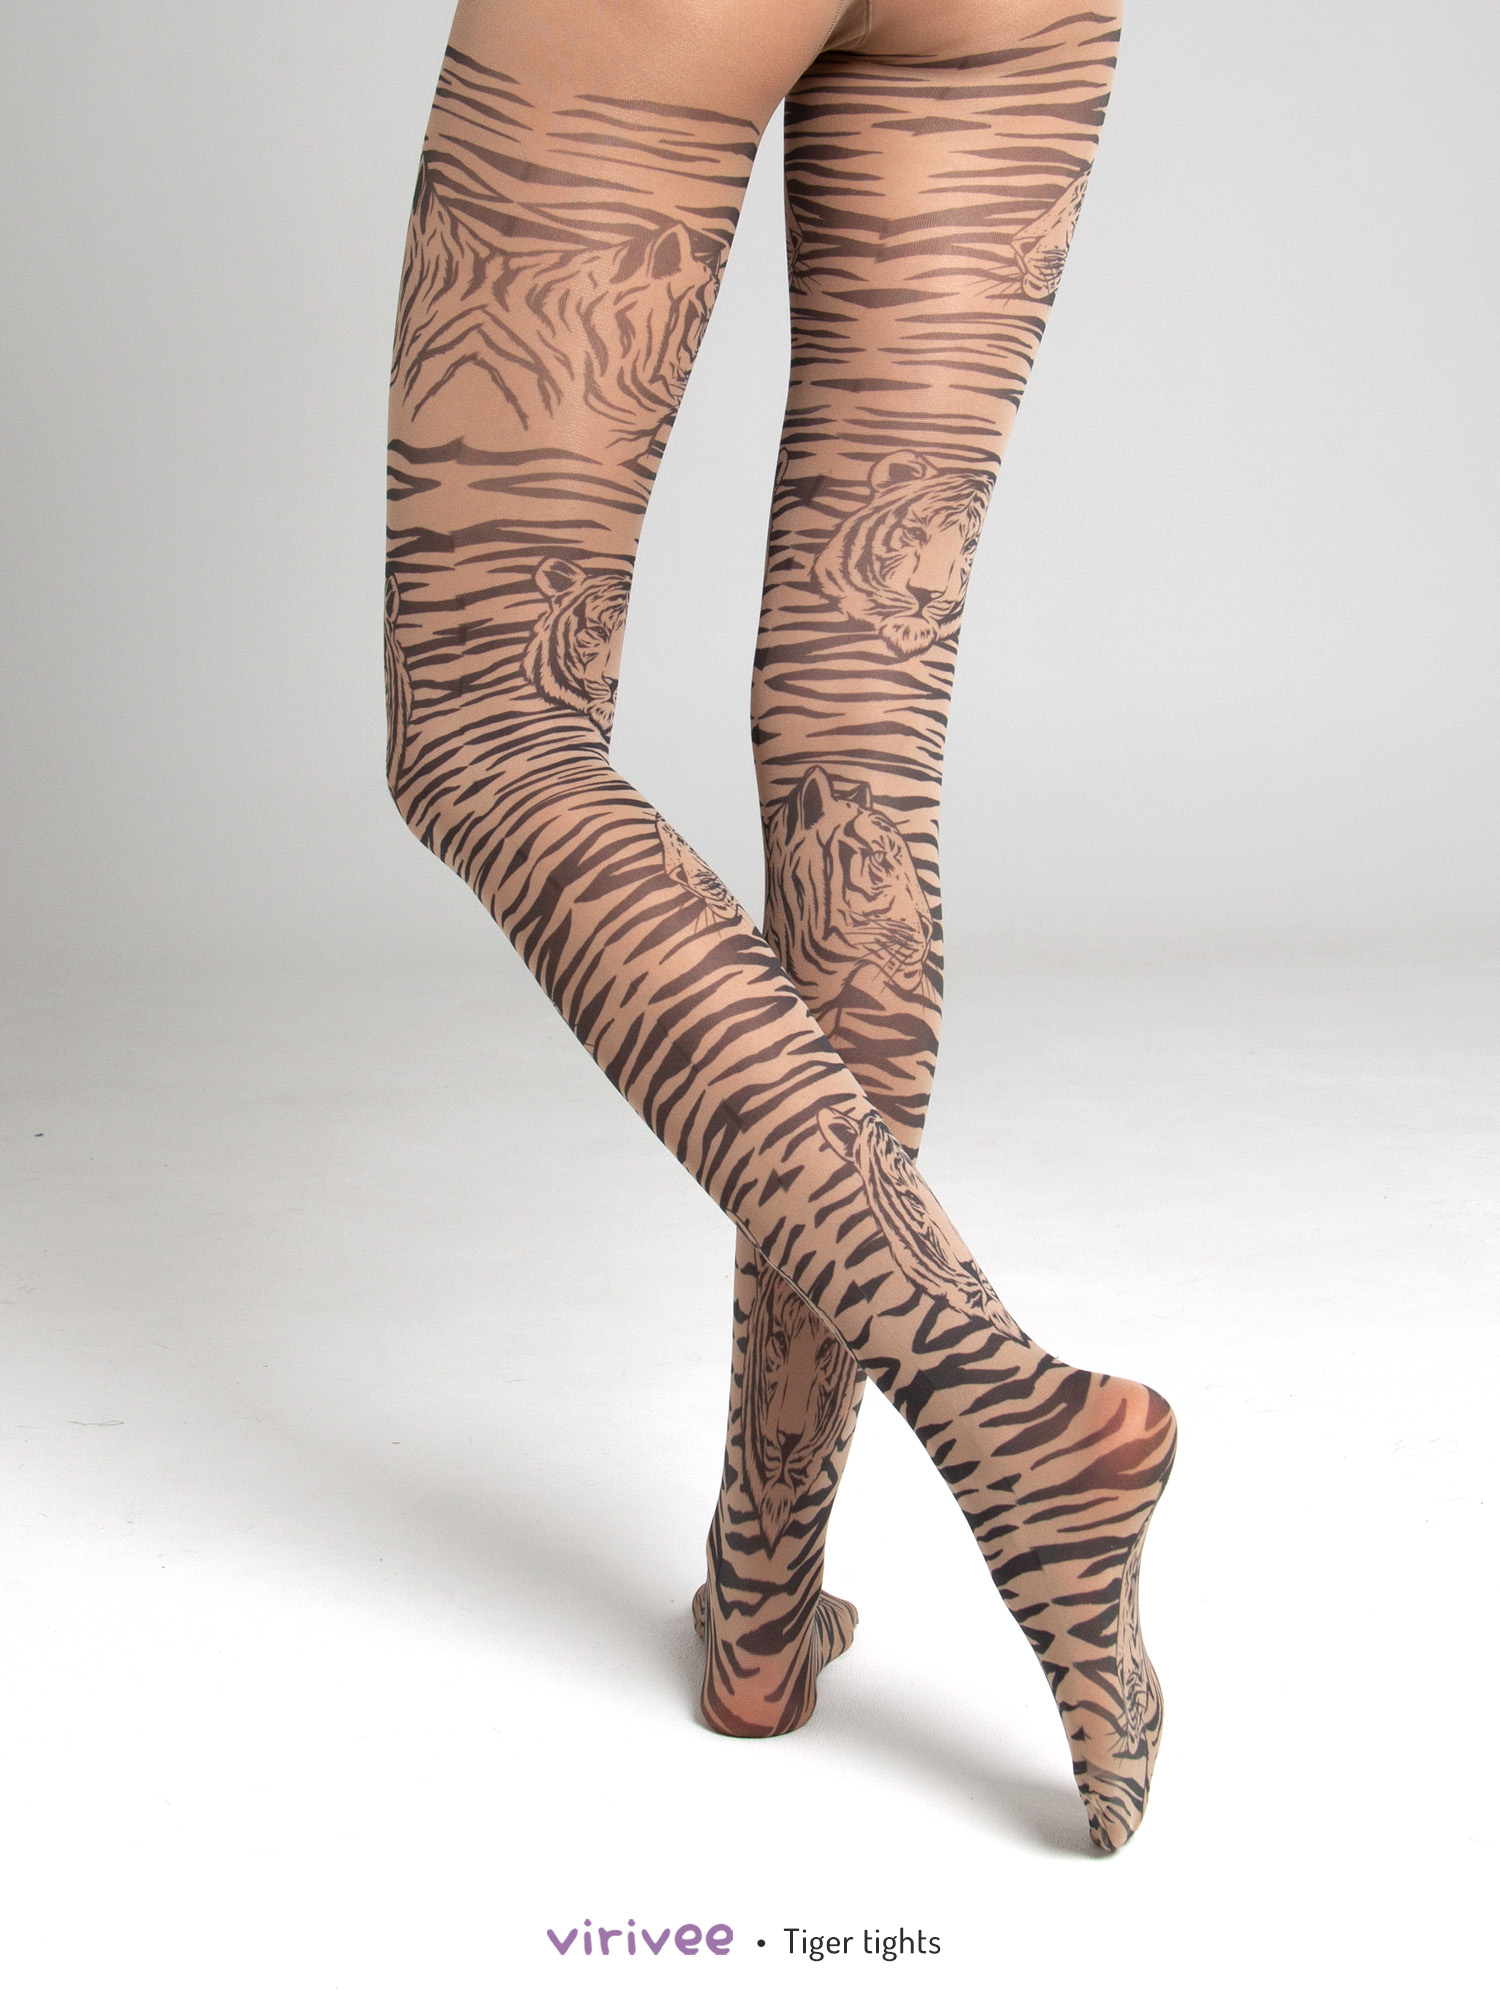 Tiger tights in brown